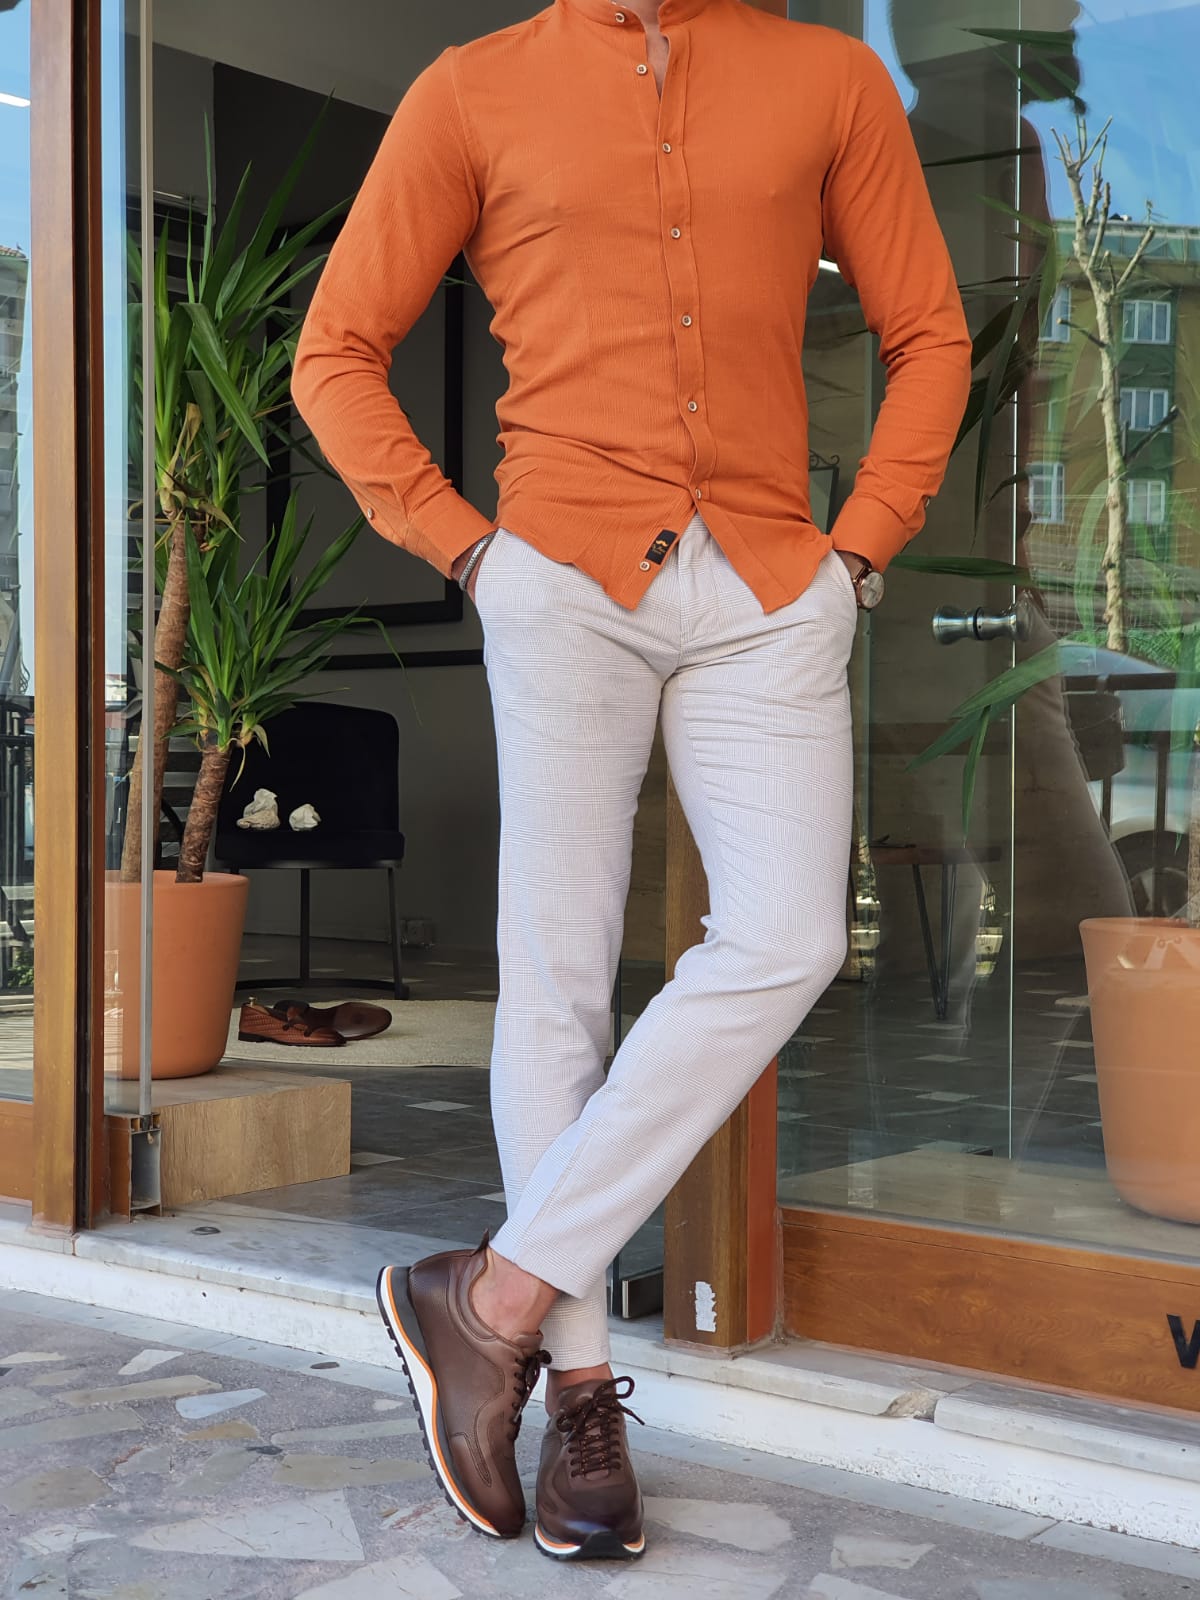 ORANGE SLIM-FIT PATTERNED WITH STAND-UP COLLAR SHIRT